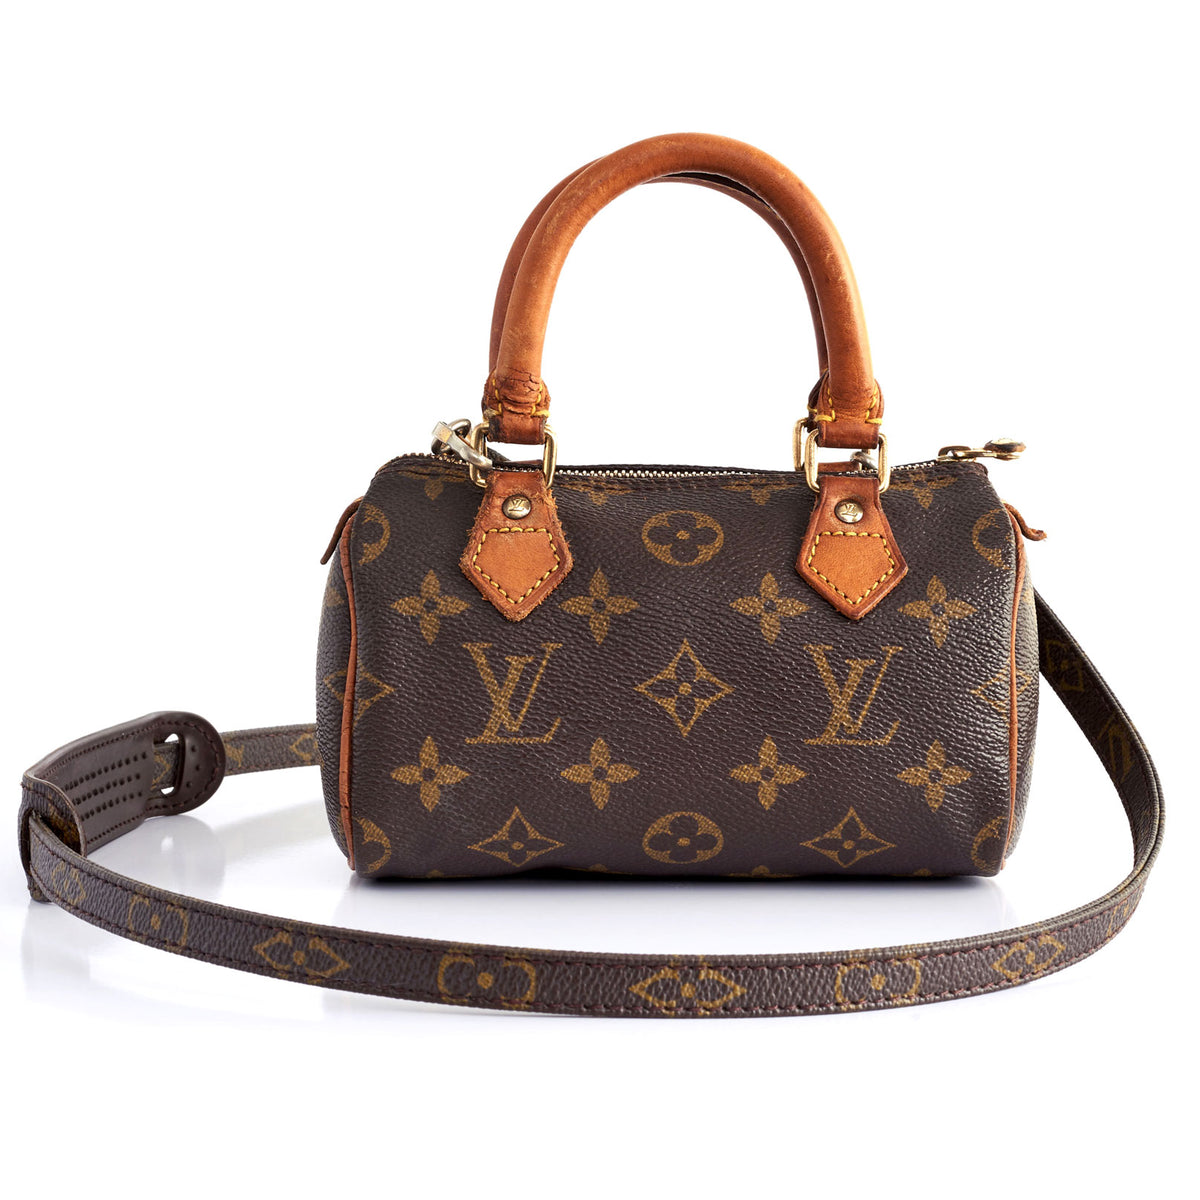 First up-cycling project: Louis Vuitton pocketbook into a